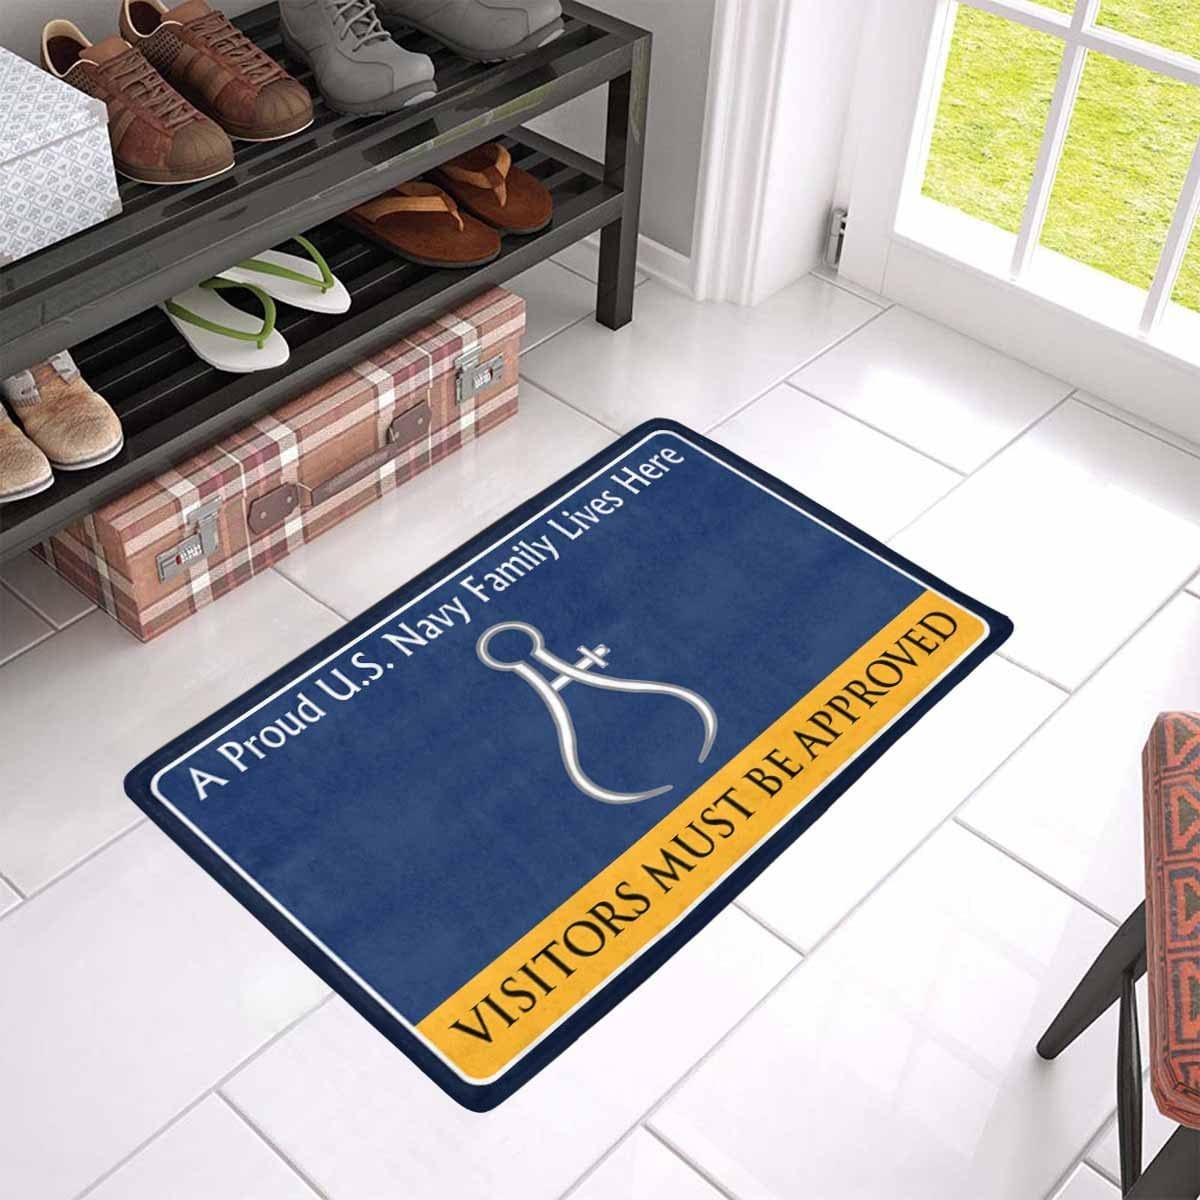 Navy Instrumentman Navy IM Family Doormat - Visitors must be approved (23,6 inches x 15,7 inches)-Doormat-Navy-Rate-Veterans Nation